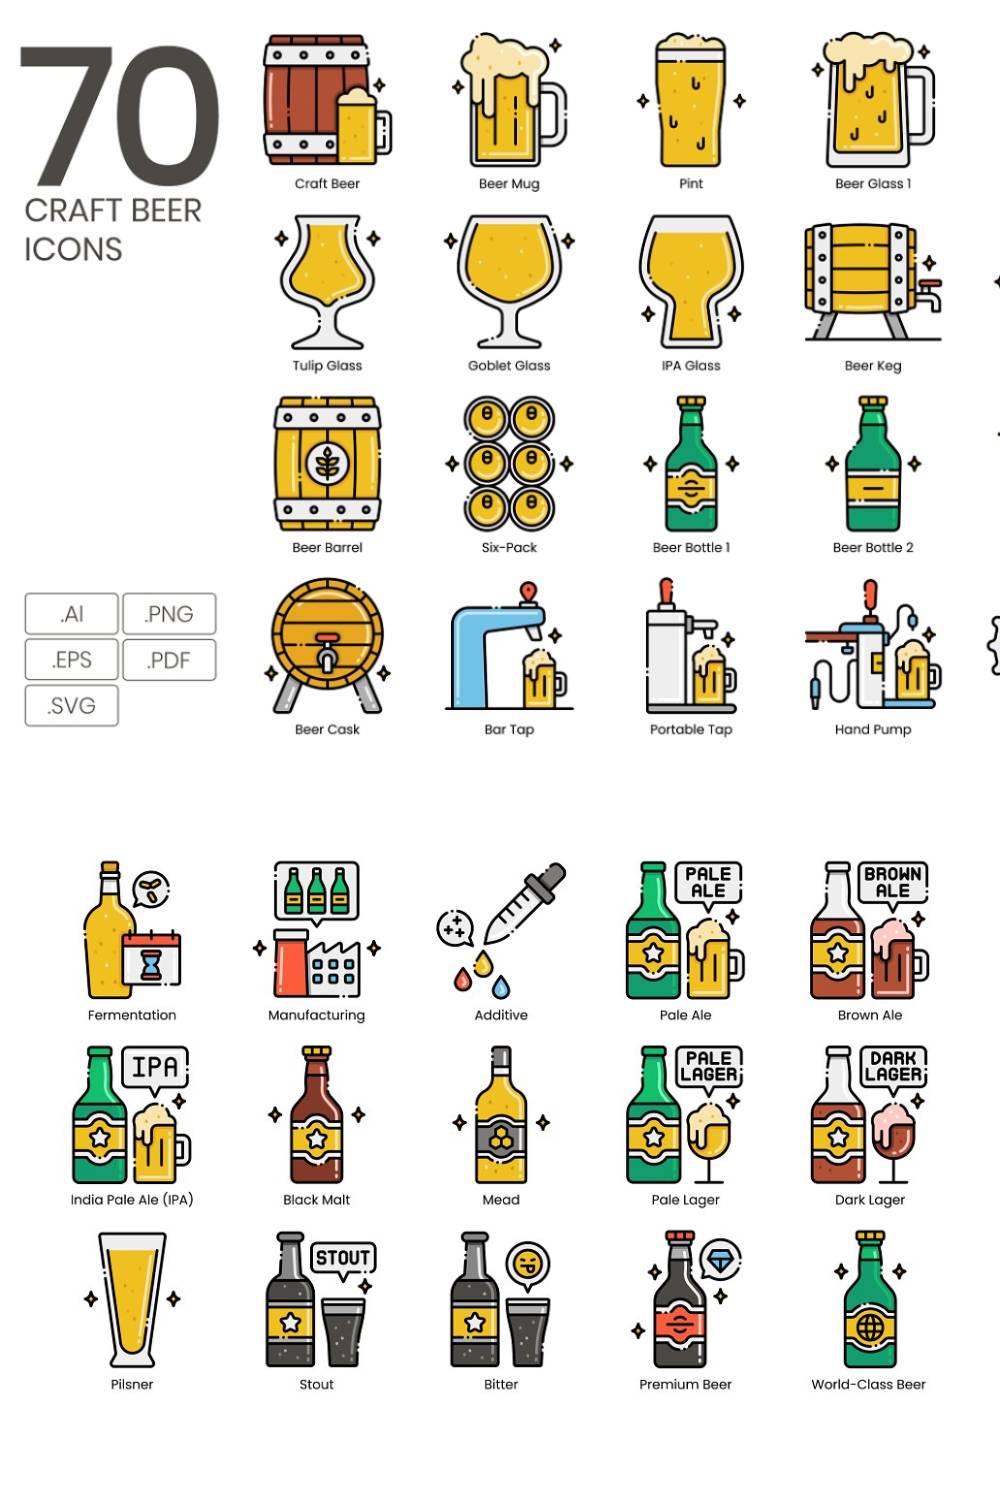 70 Craft Beer Icons - Aesthetics Pinterest Cover.